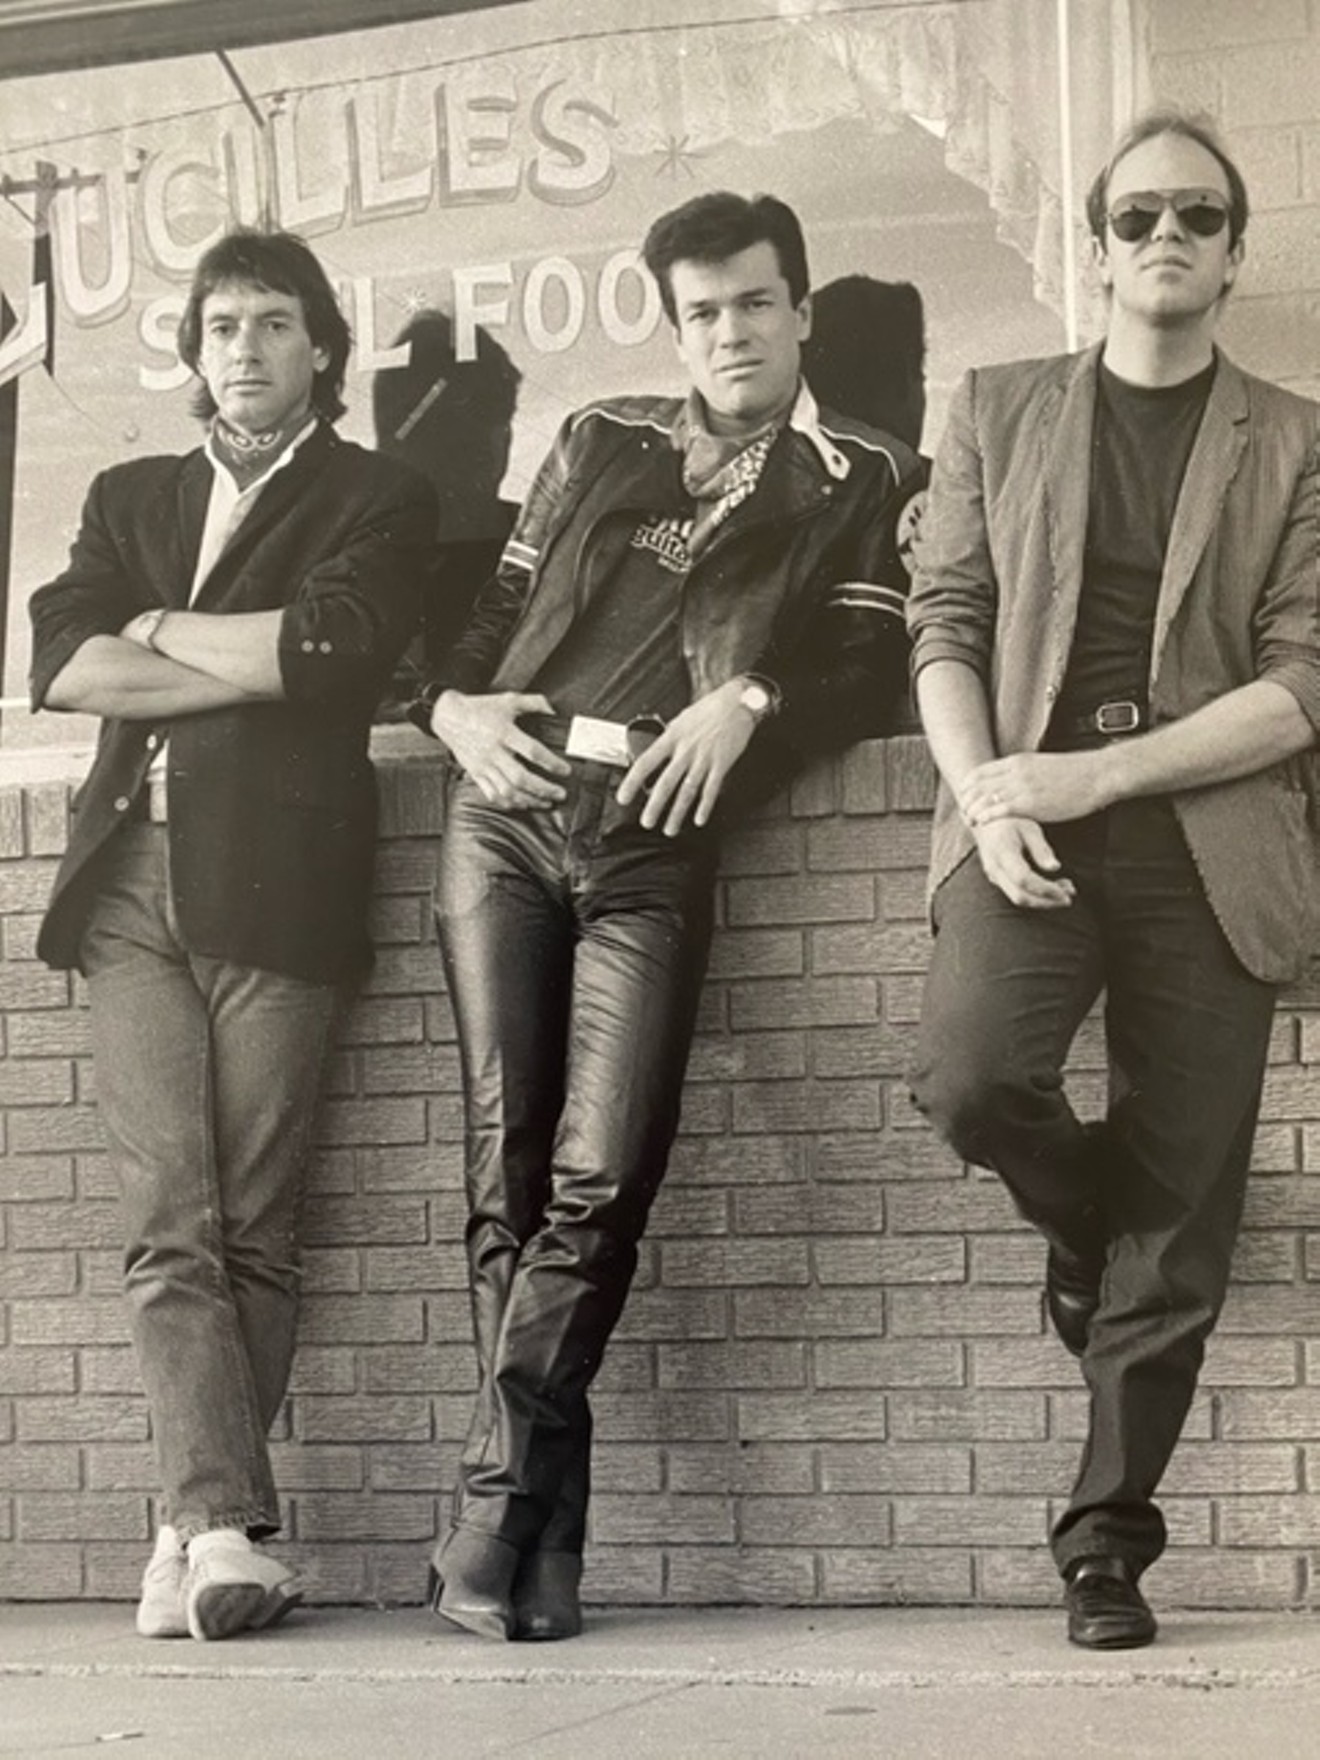 Chuck Hall & The Brick Wall in their glory days. Their 1987 eponymous record has been rereleased by Fervor Records.